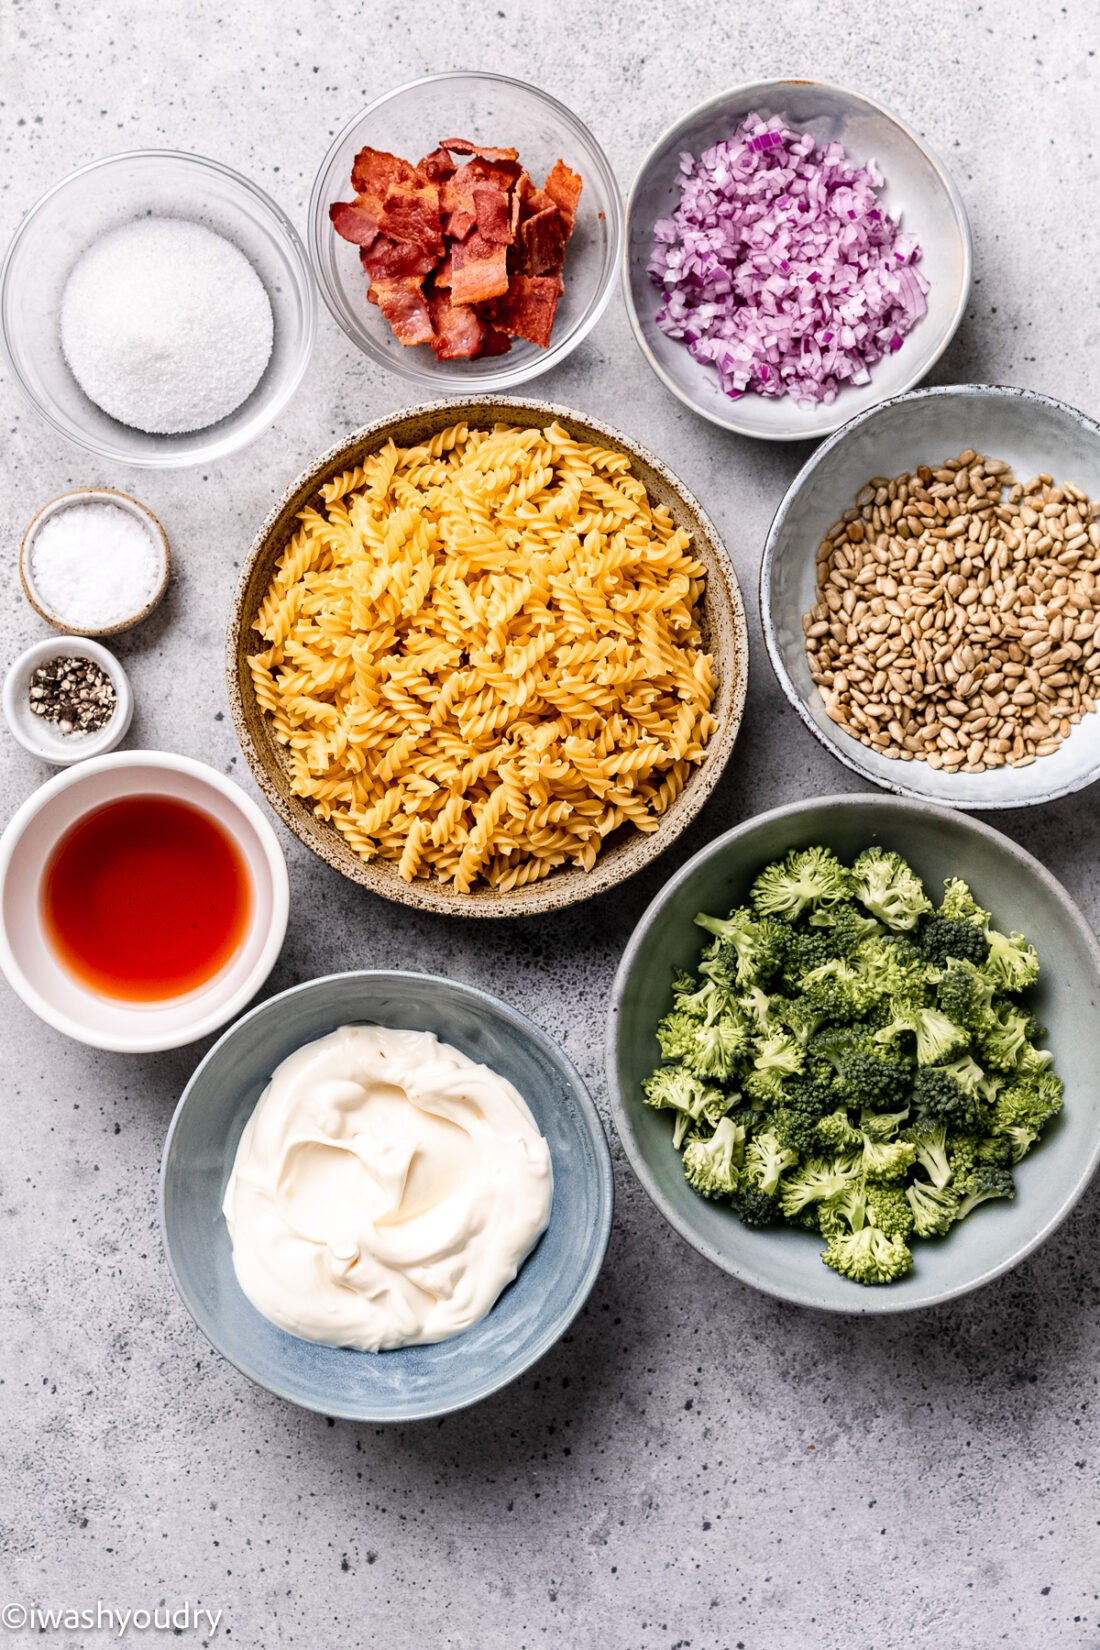 ingredients for broccoli pasta salad in small bowls arranged on white surface.